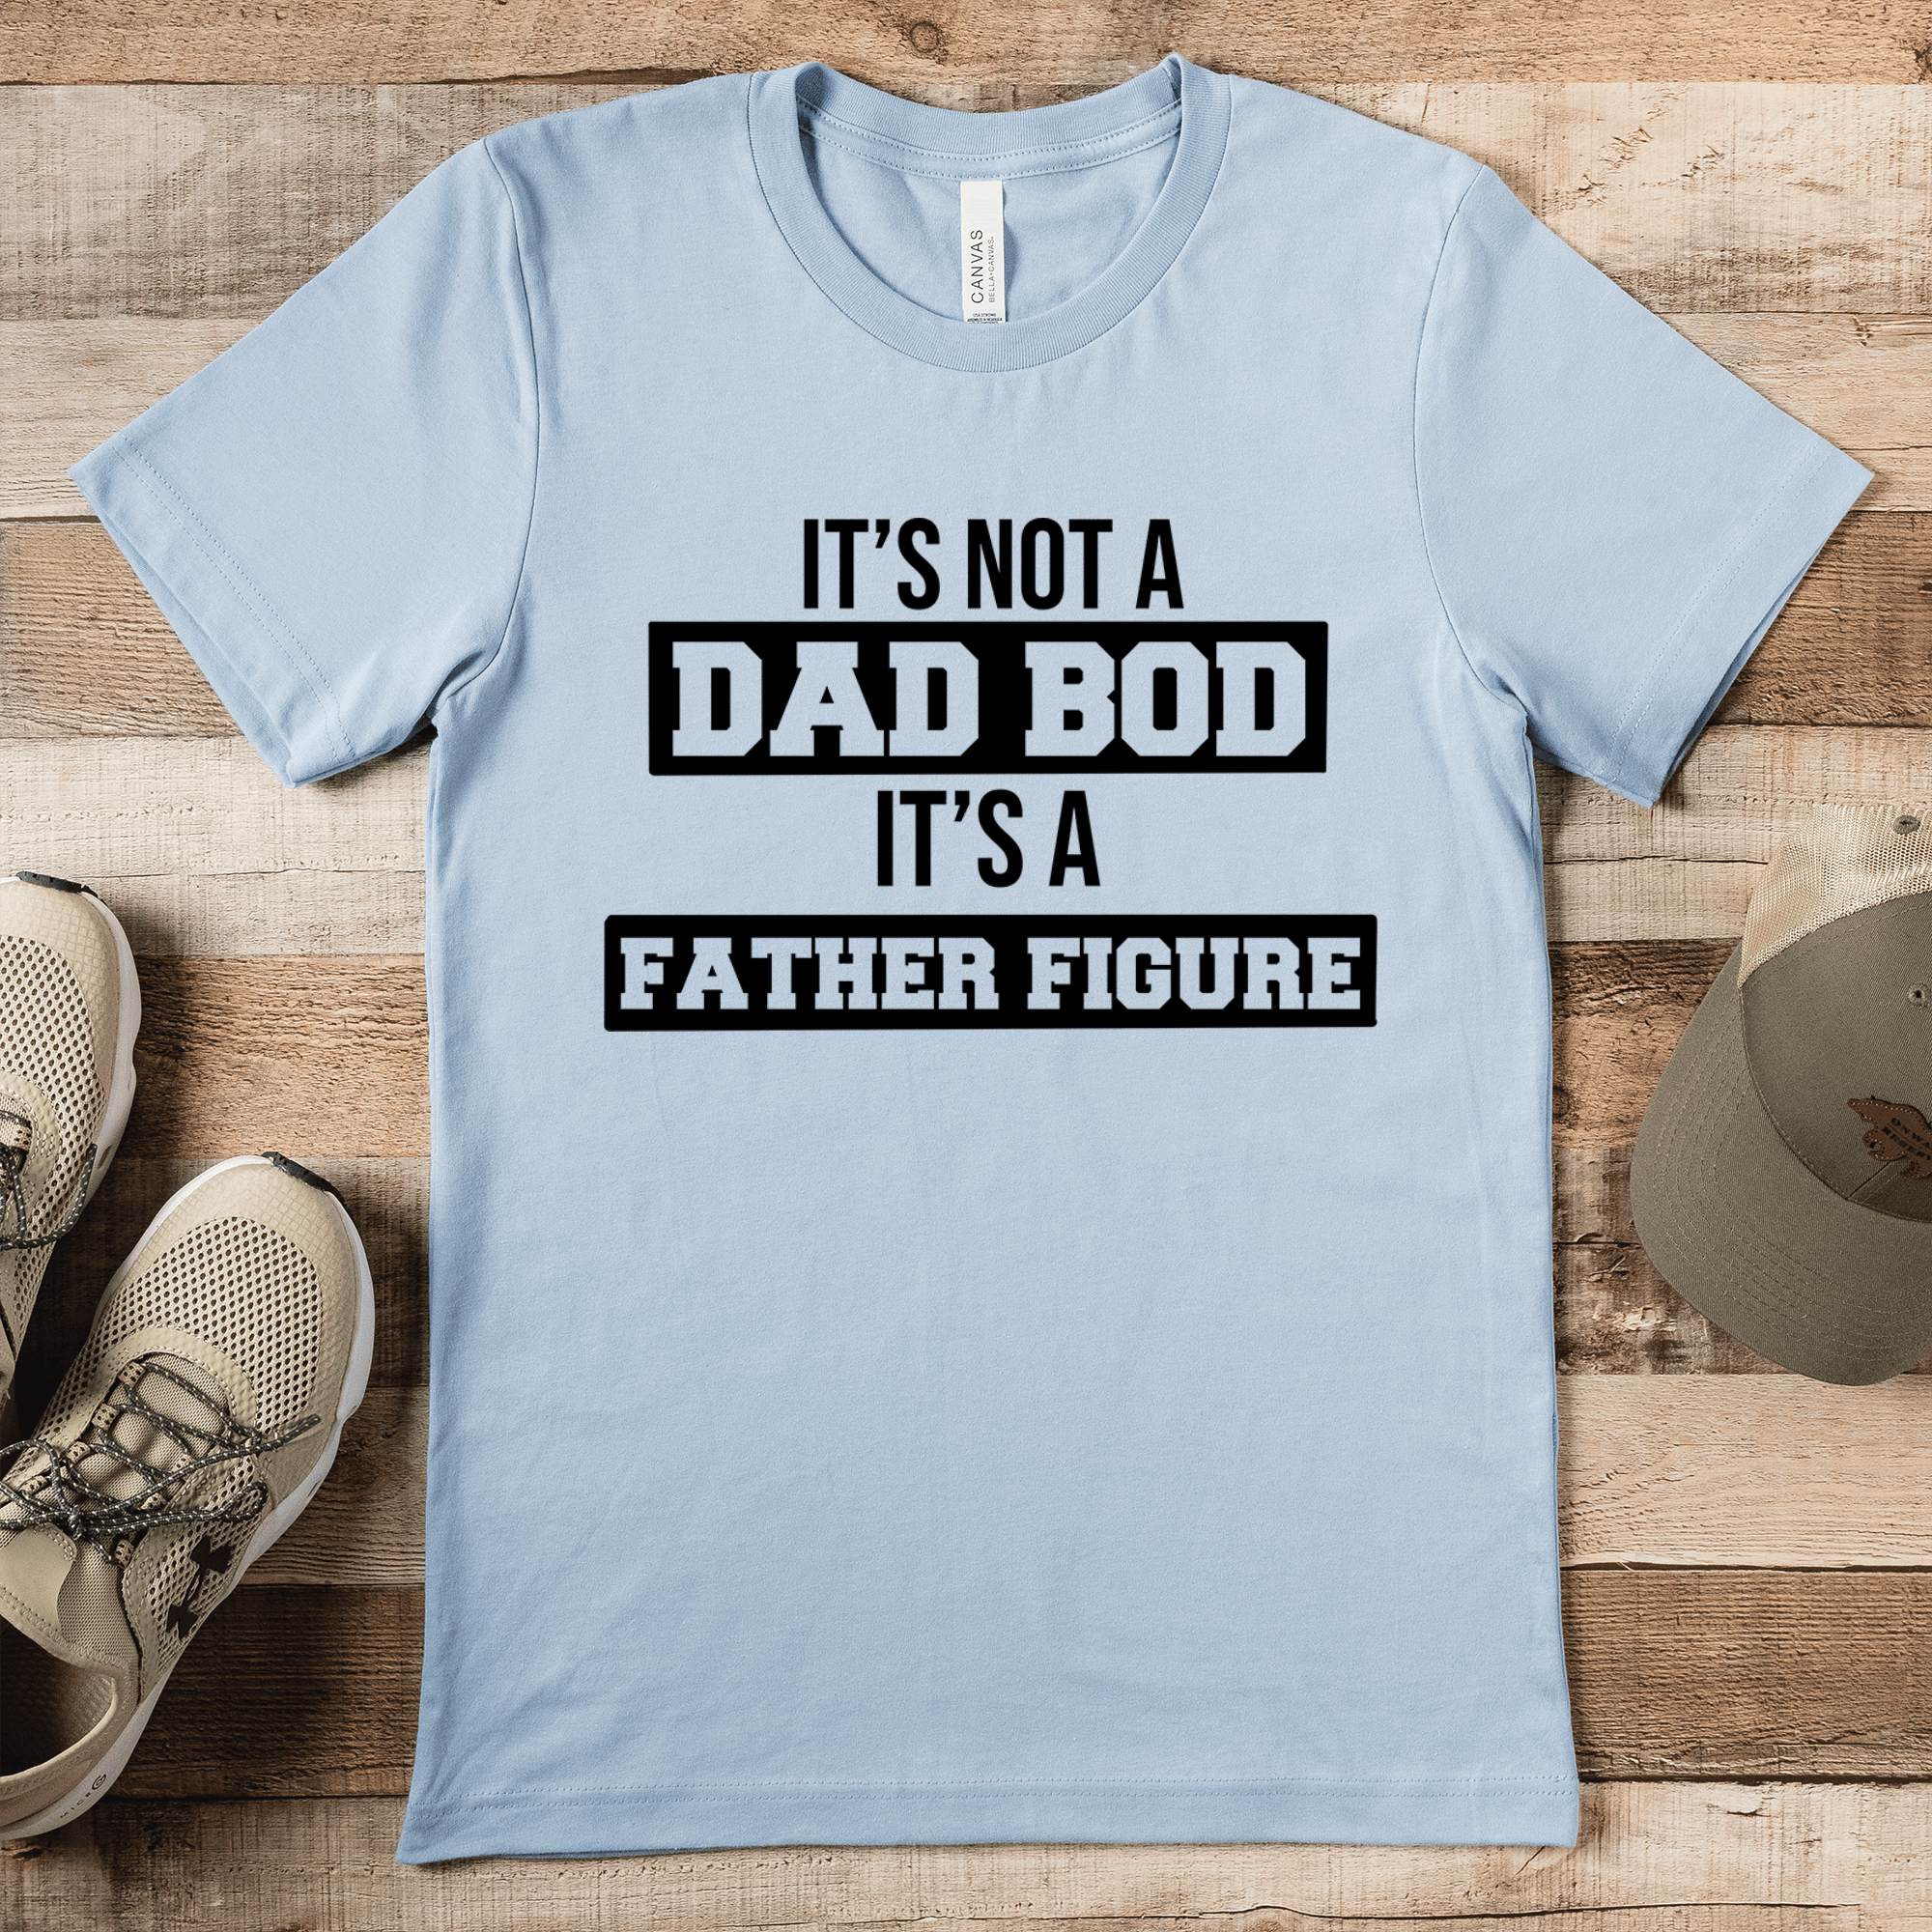 Light Blue Mens T-Shirt With Dad Bod Father Figure Design